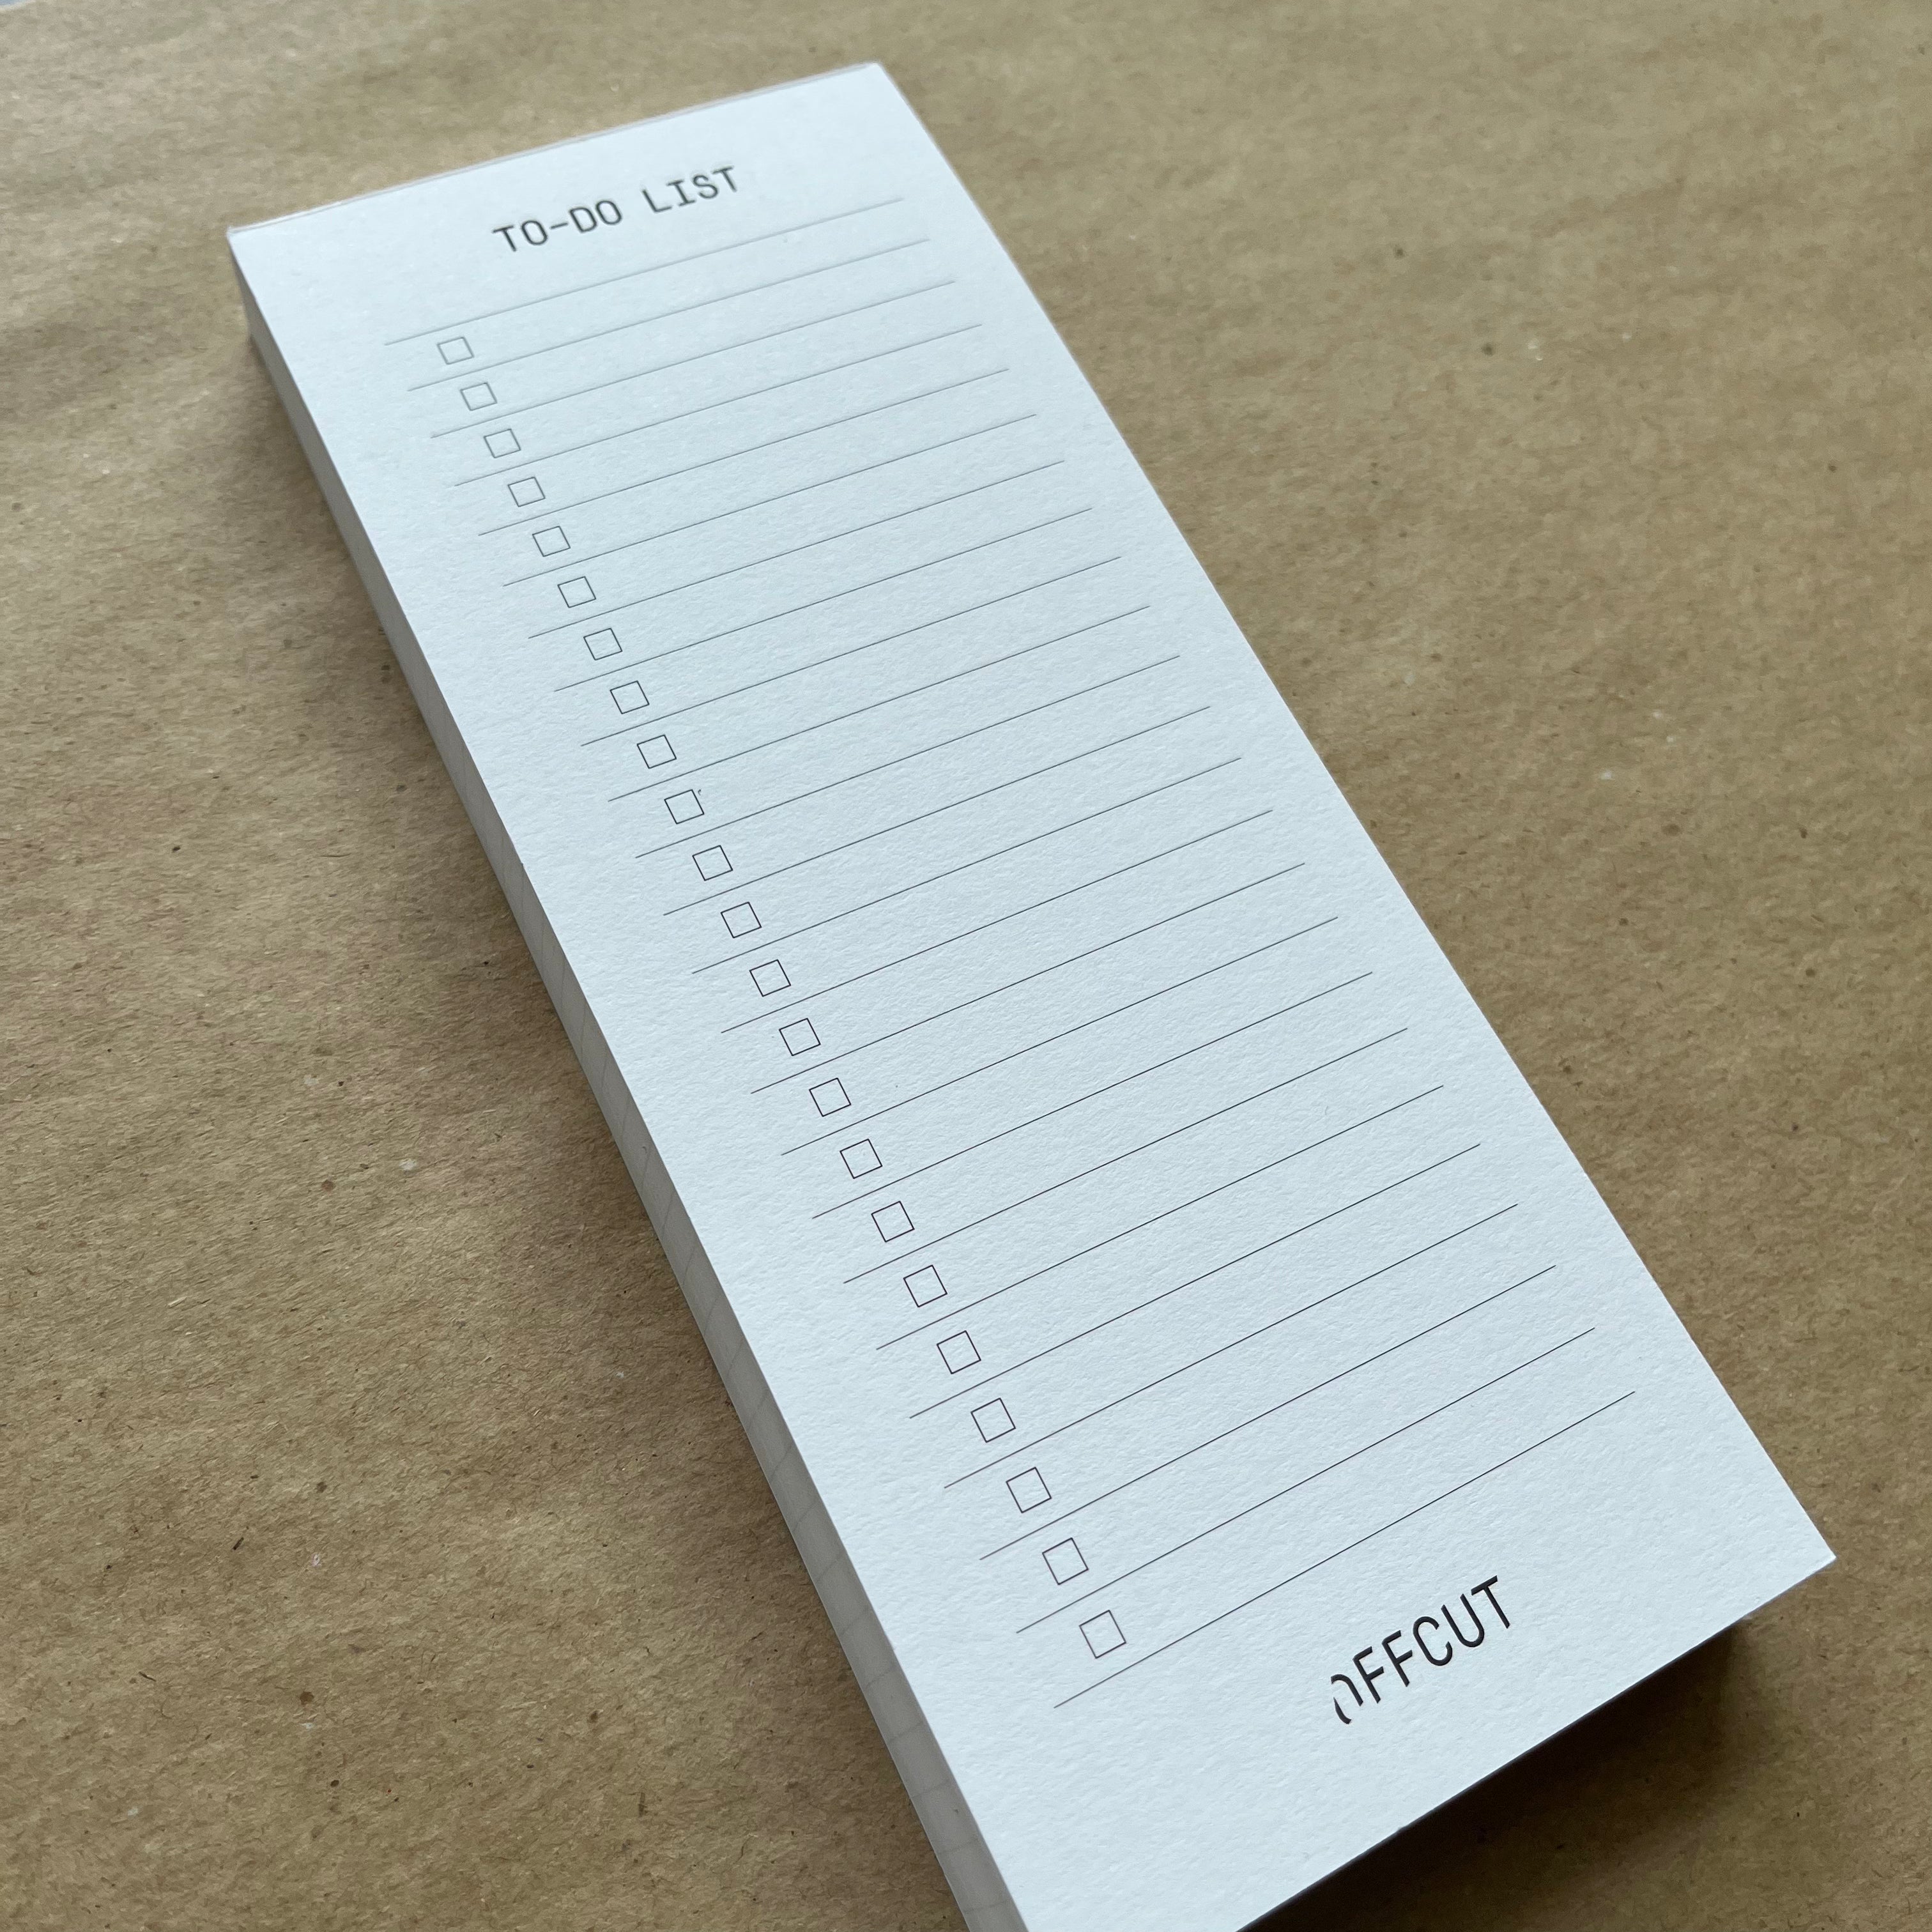 The To-Do List by OFFCUT